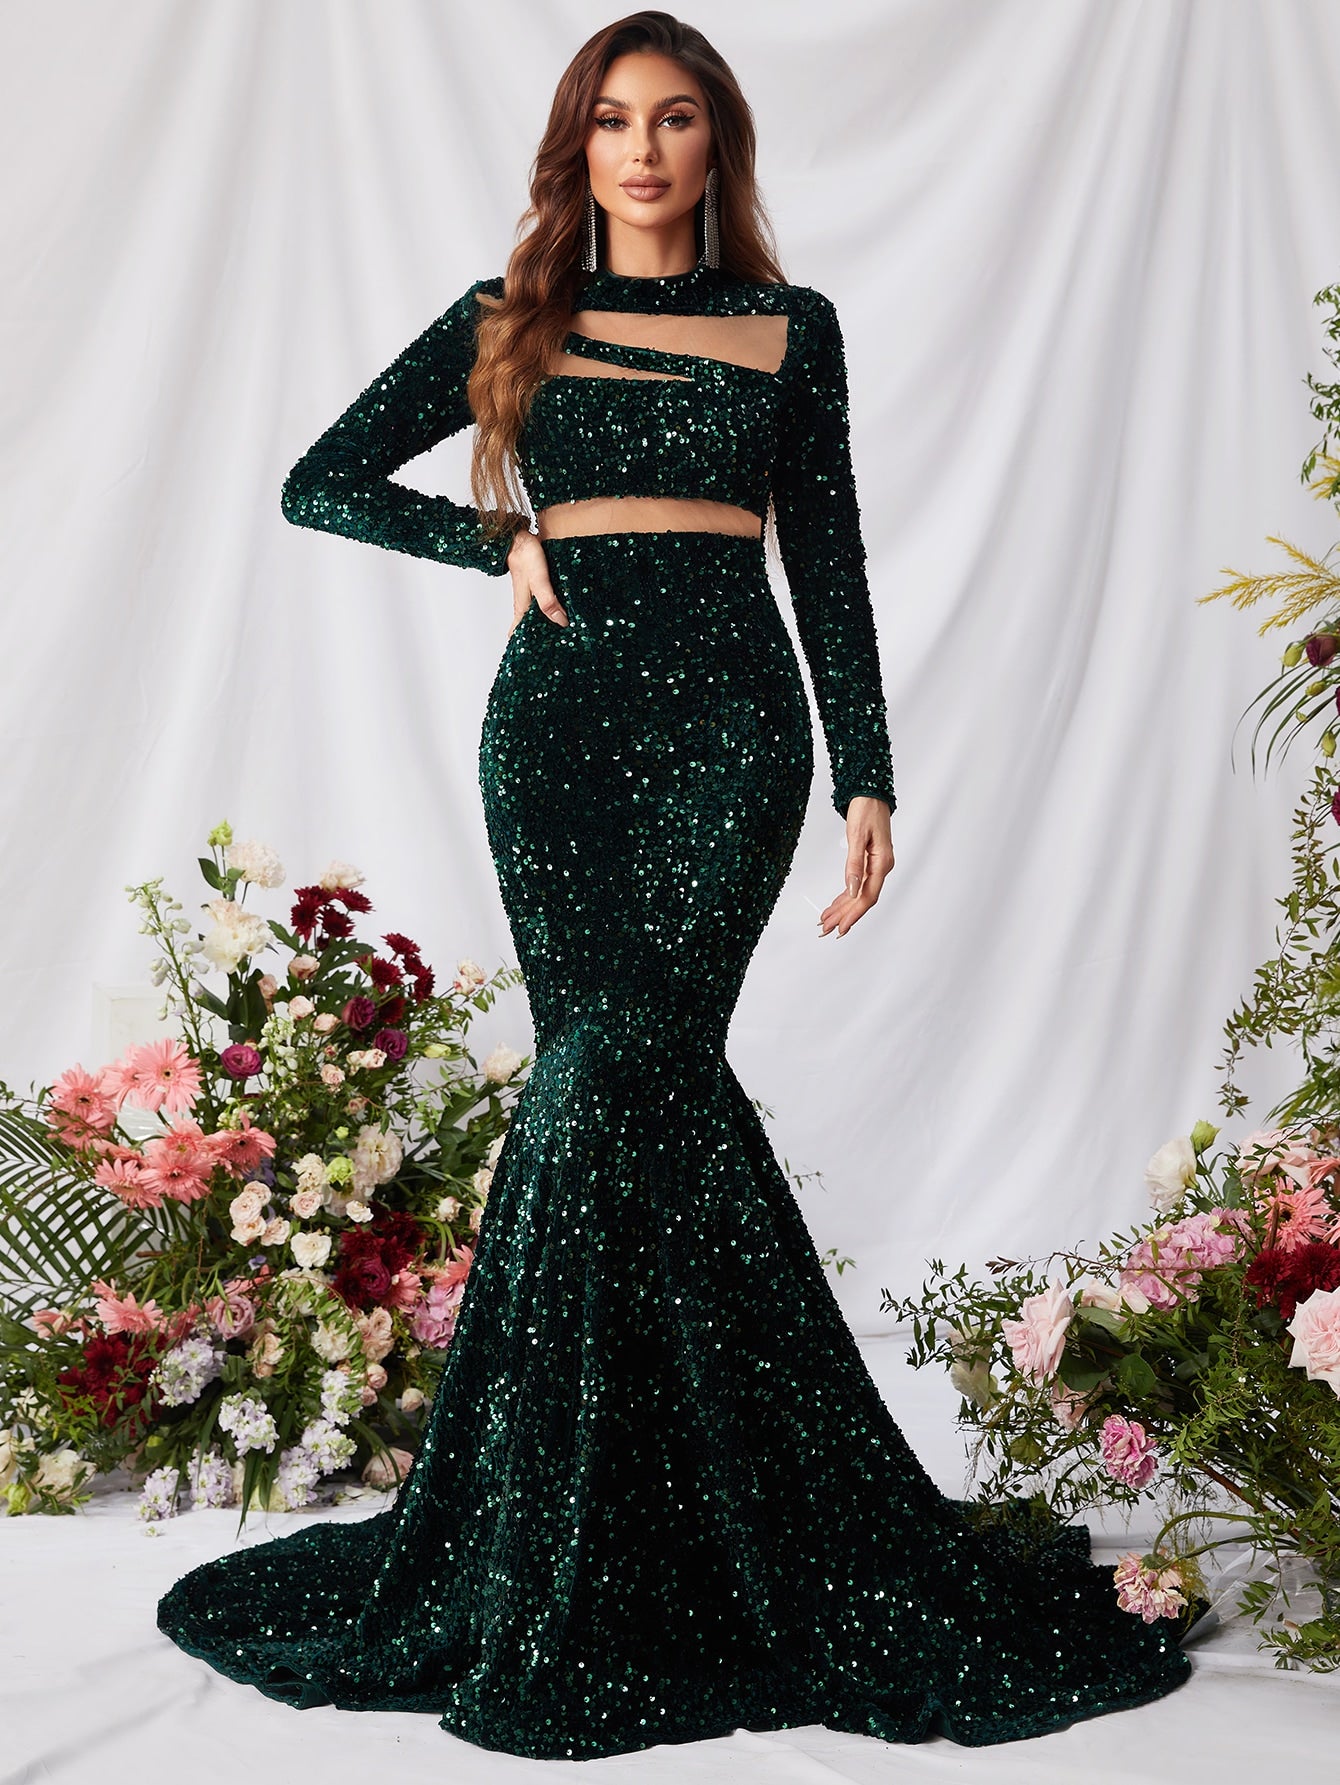 Cut Out Front Stand Neck Long Sleeve Sequin Mermaid Dress